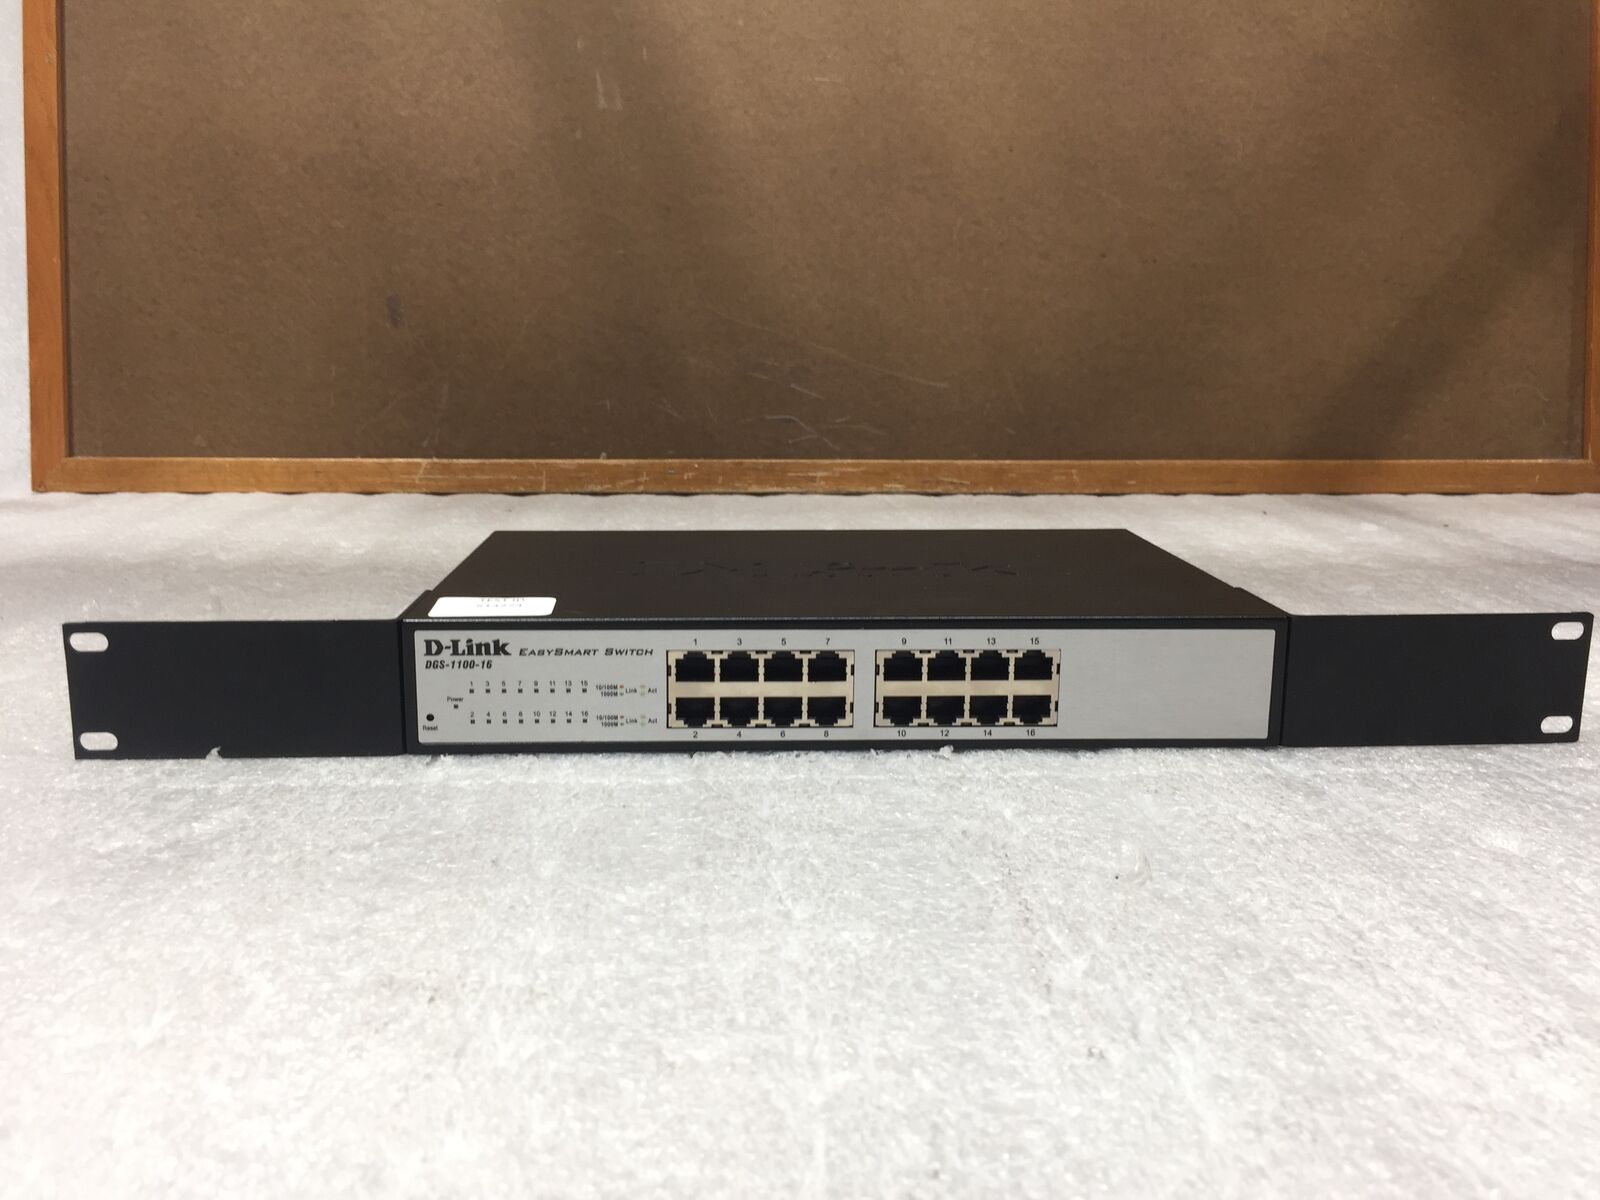 D-Link DGS-1100-16 16-Port Gigabit Smart Managed Switch with Rack Ears, Tested